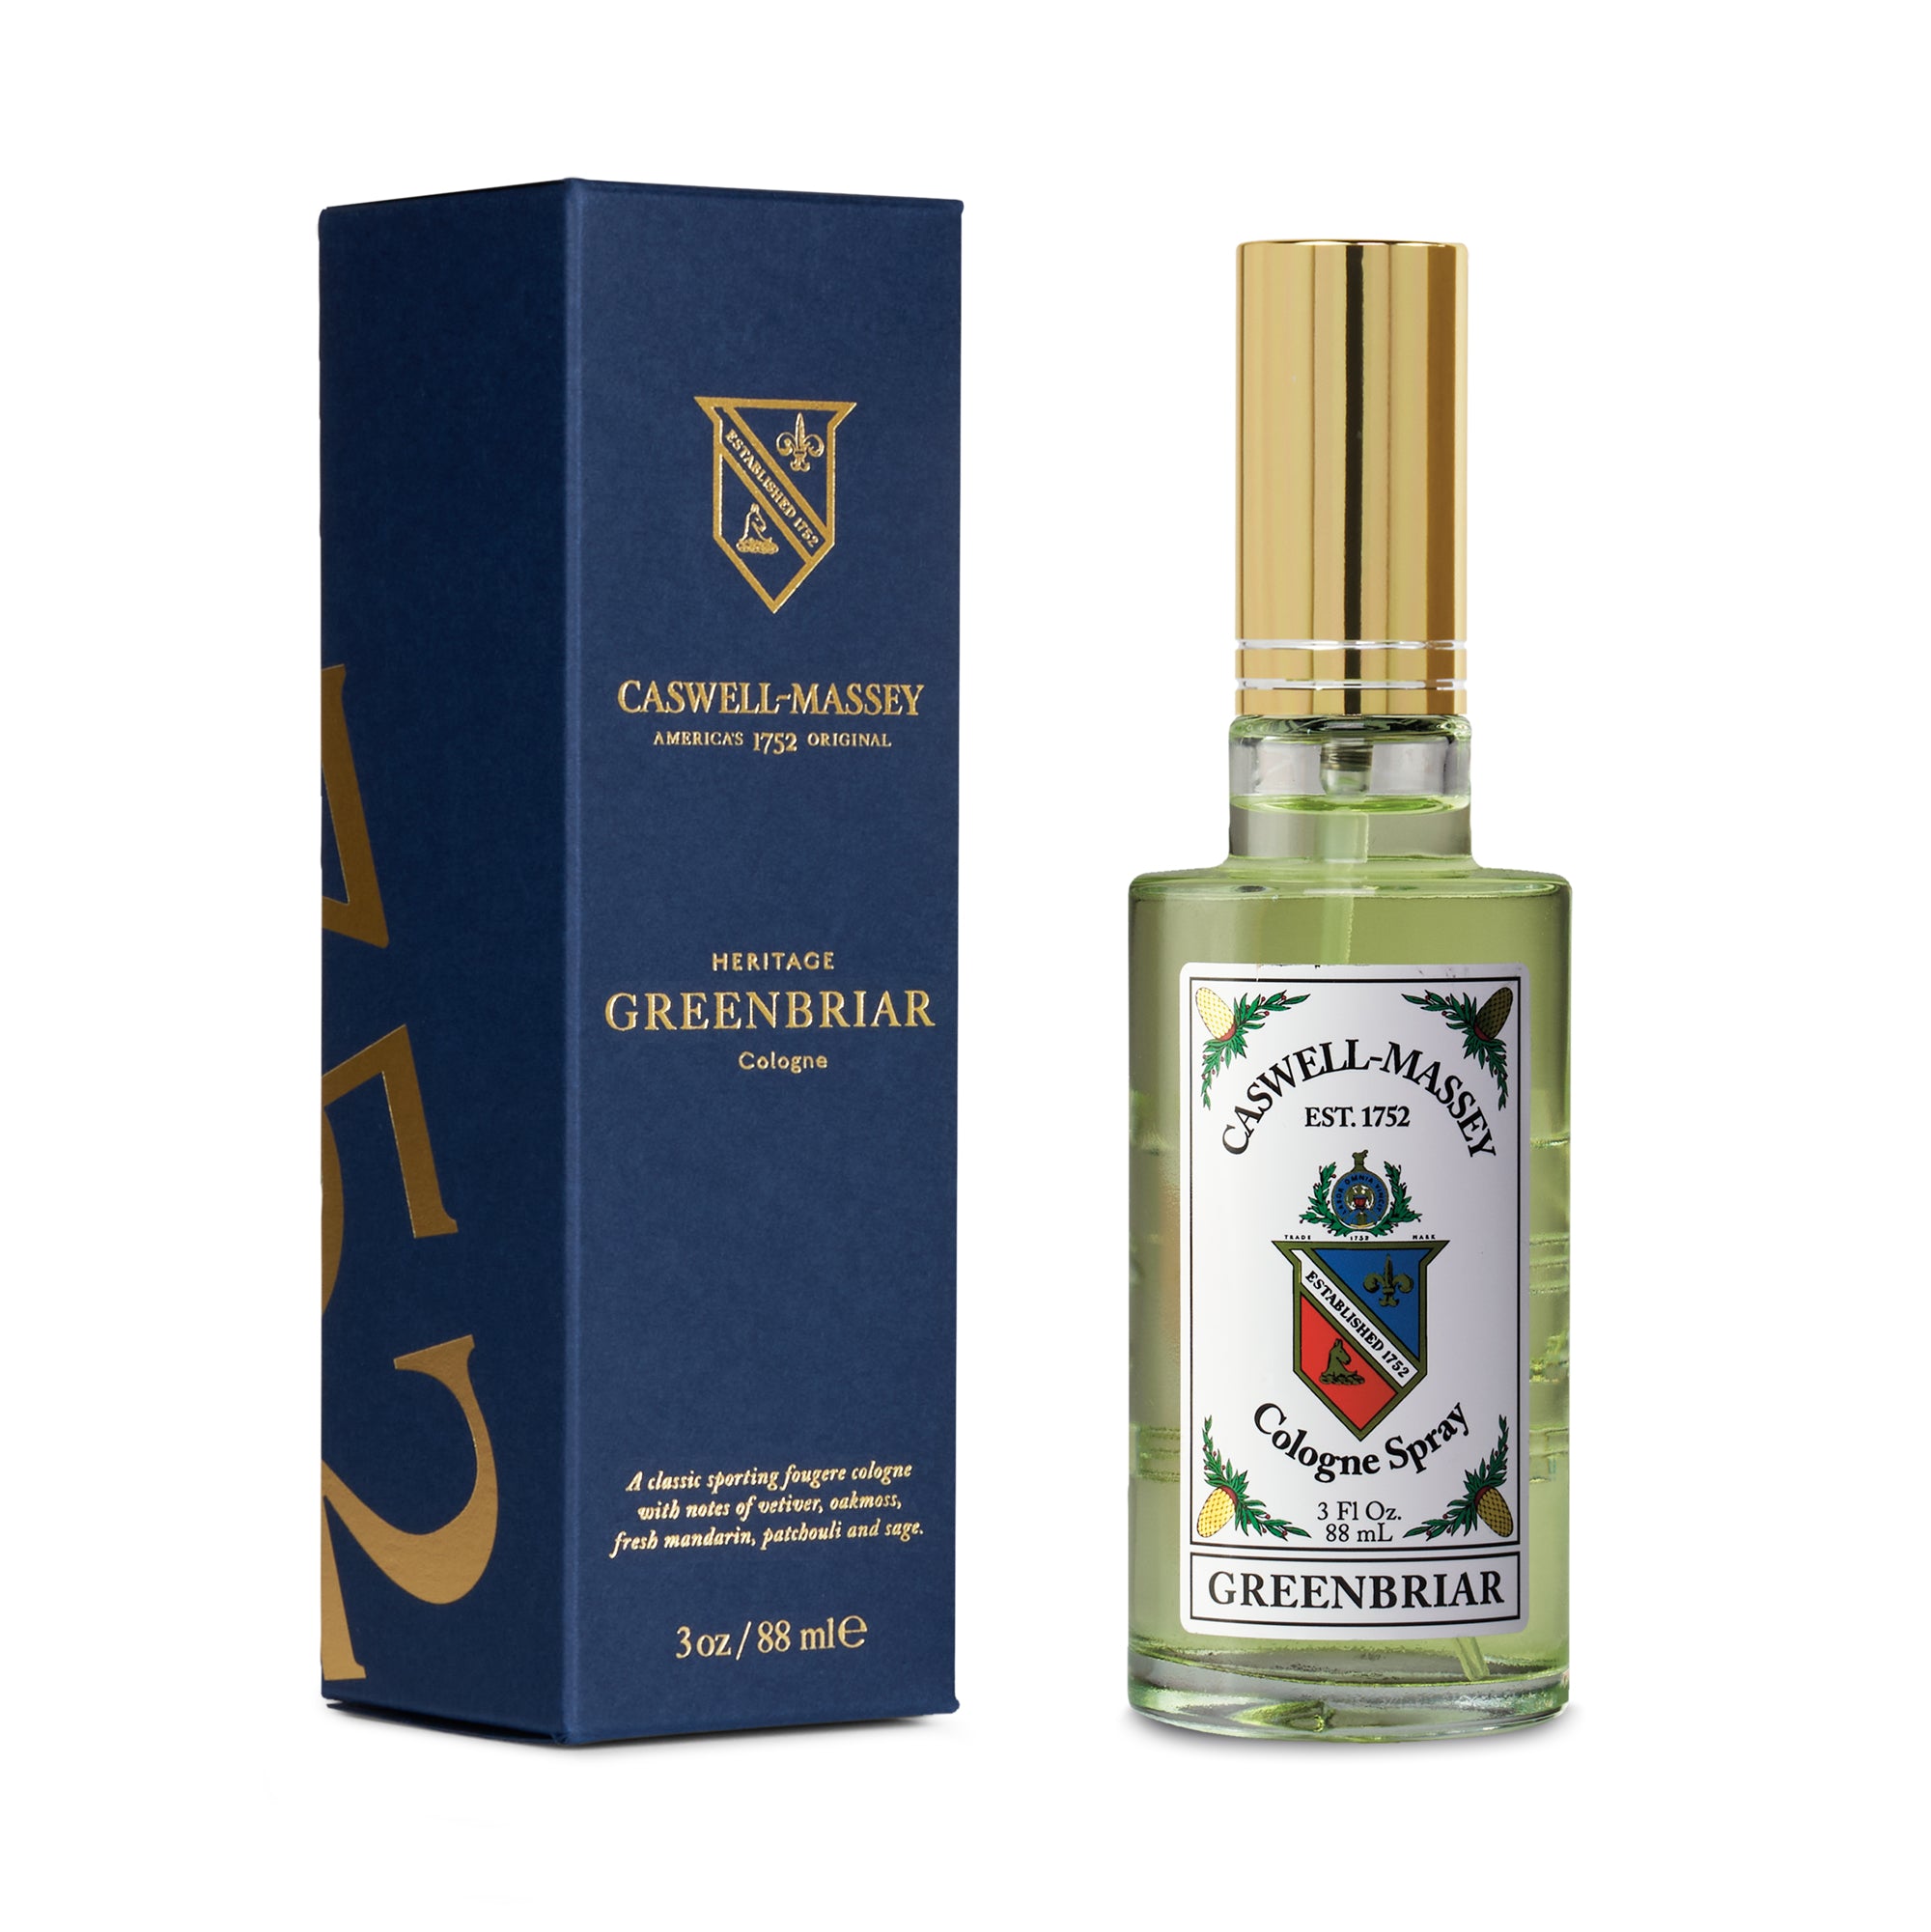 Caswell-Massey® Gold Cap Greenbriar | 88ml Cologne, shown with navy blue box